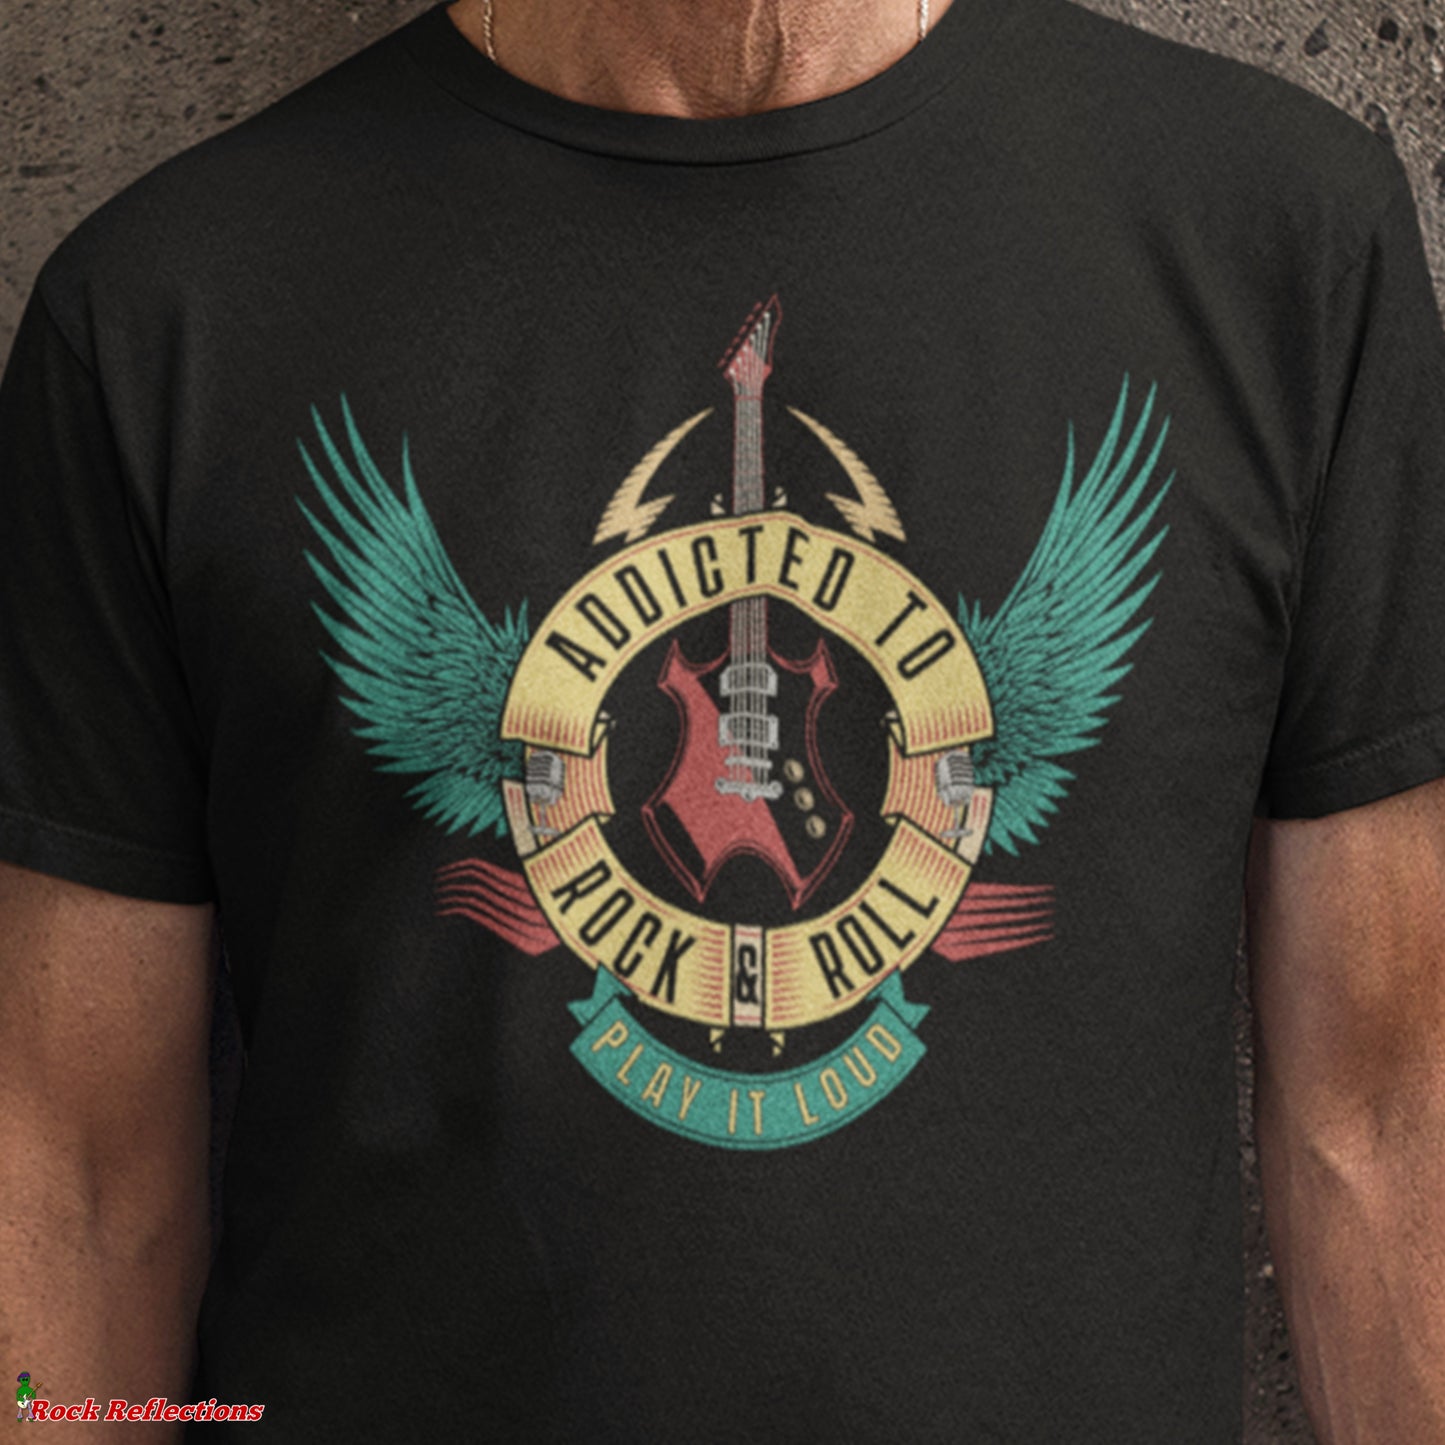 Addicted to Rock & Roll T-Shirt SPOD